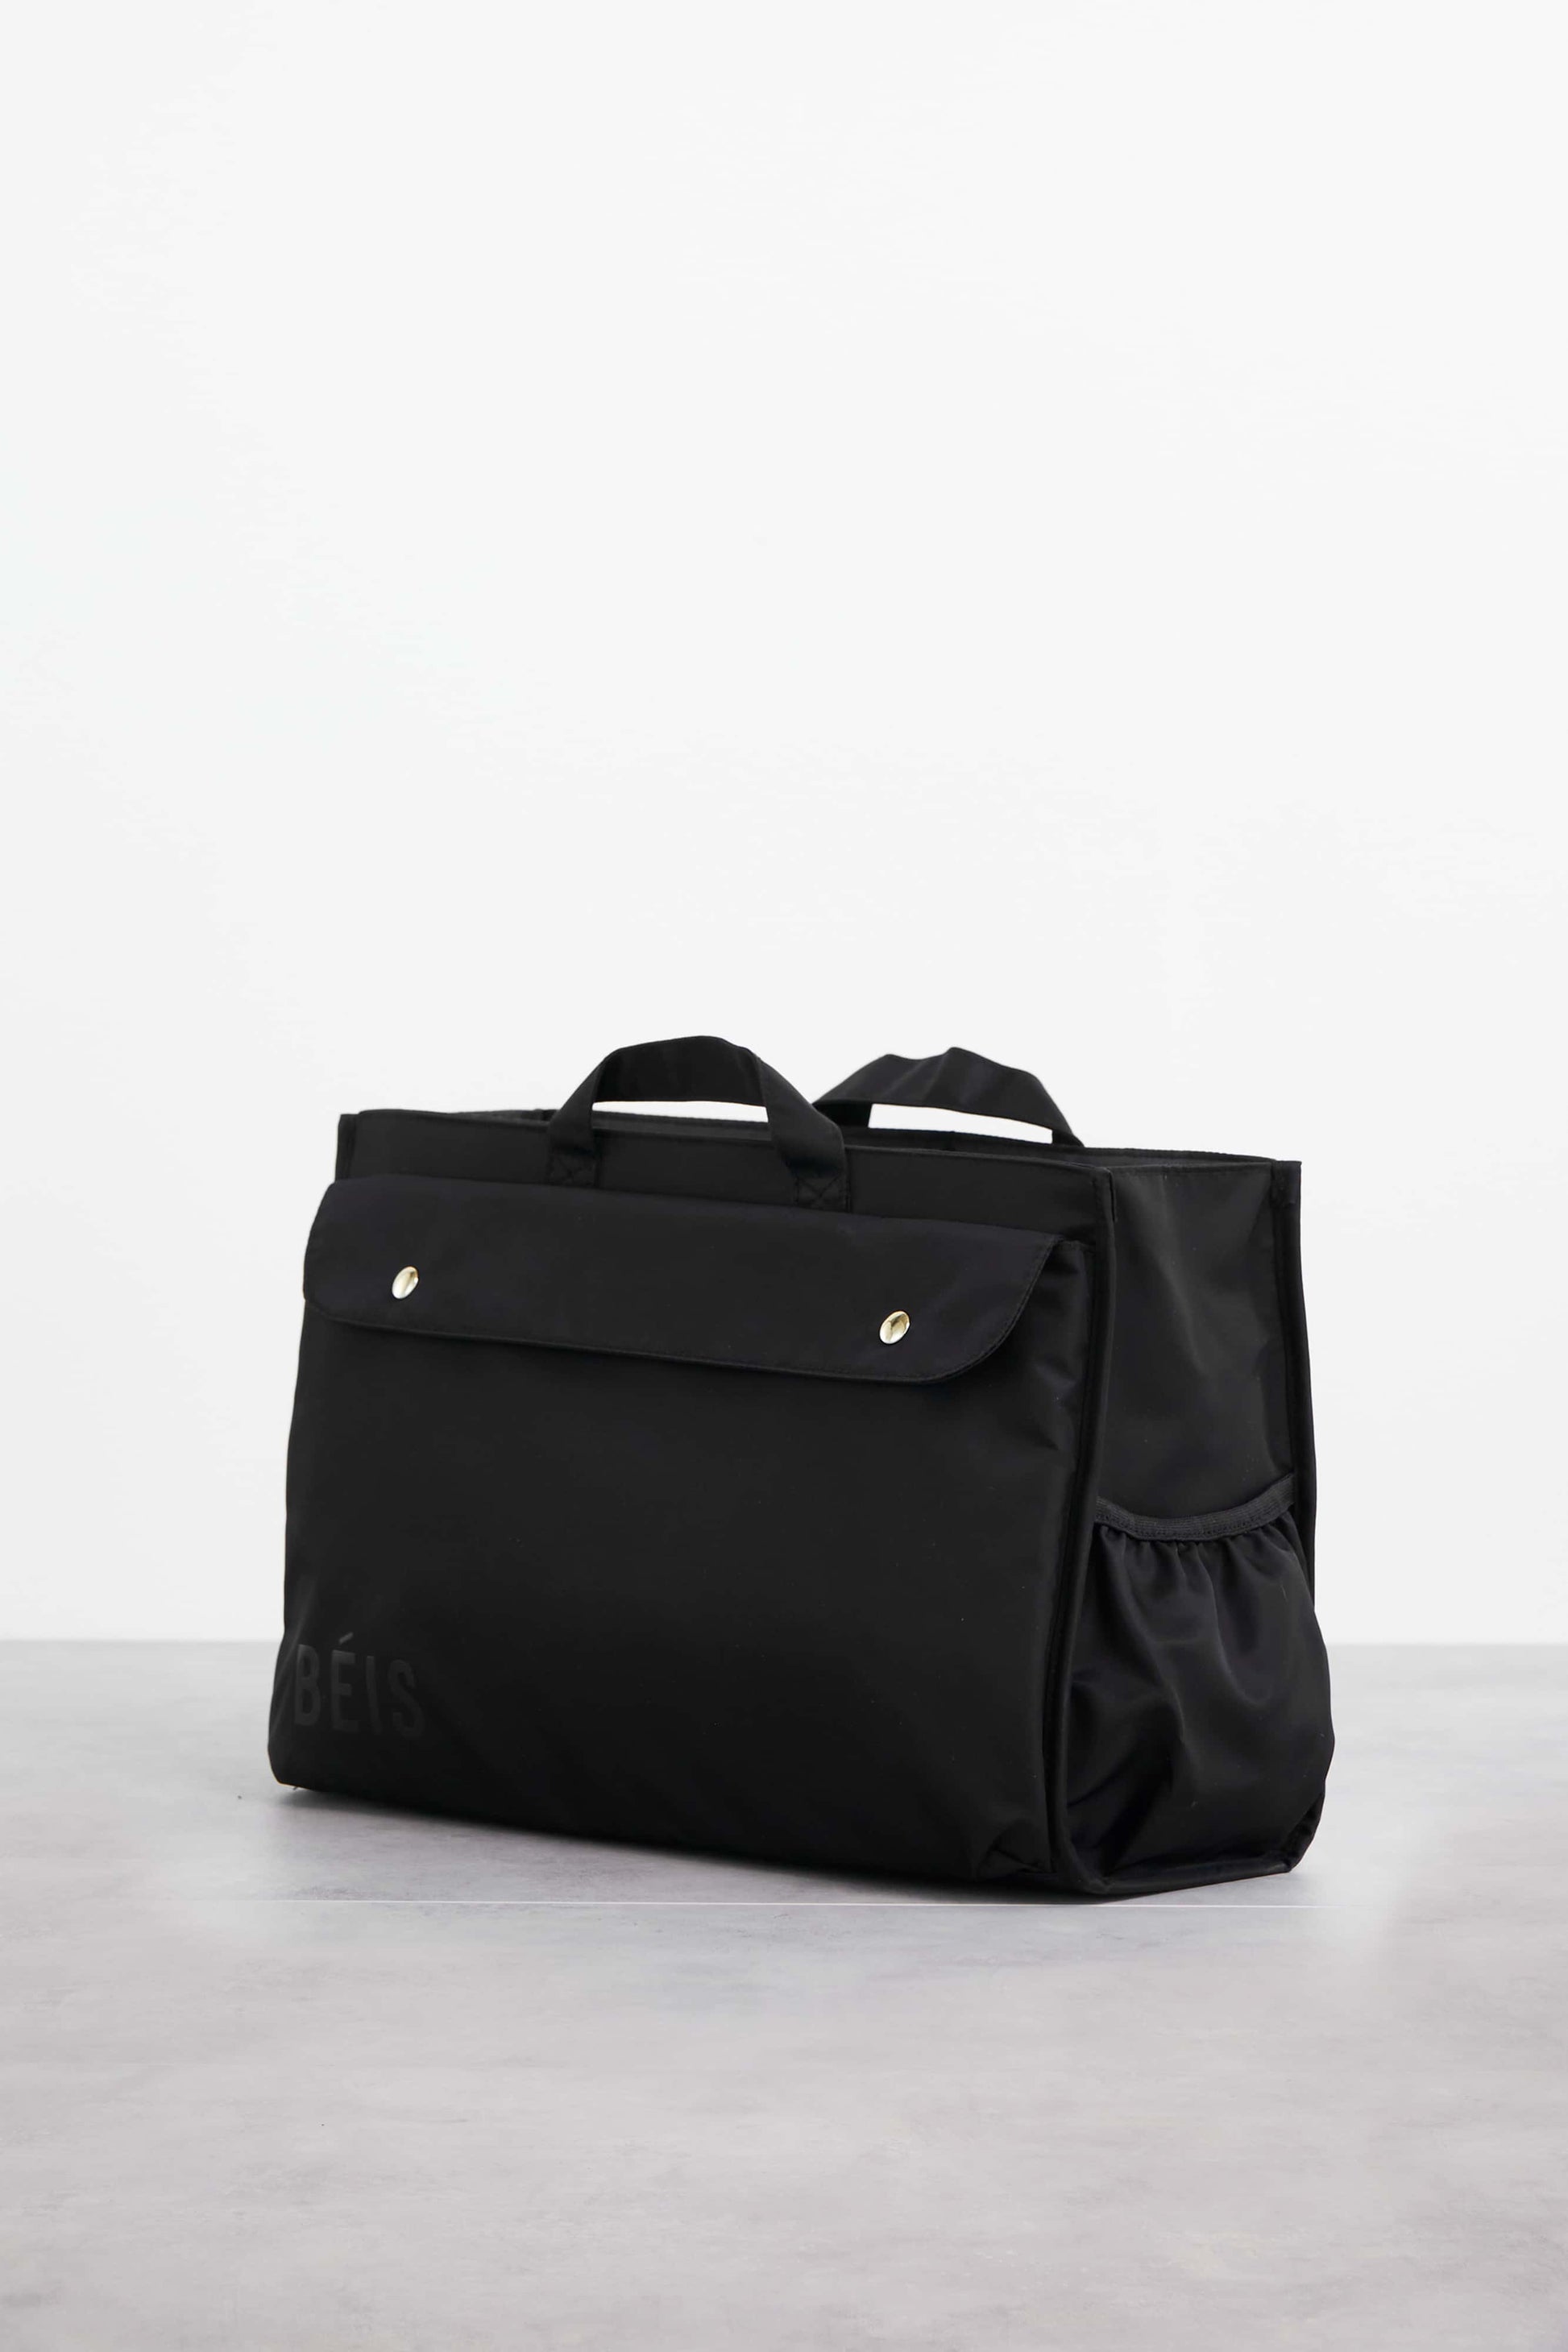 Tote Insert Black Front and Side